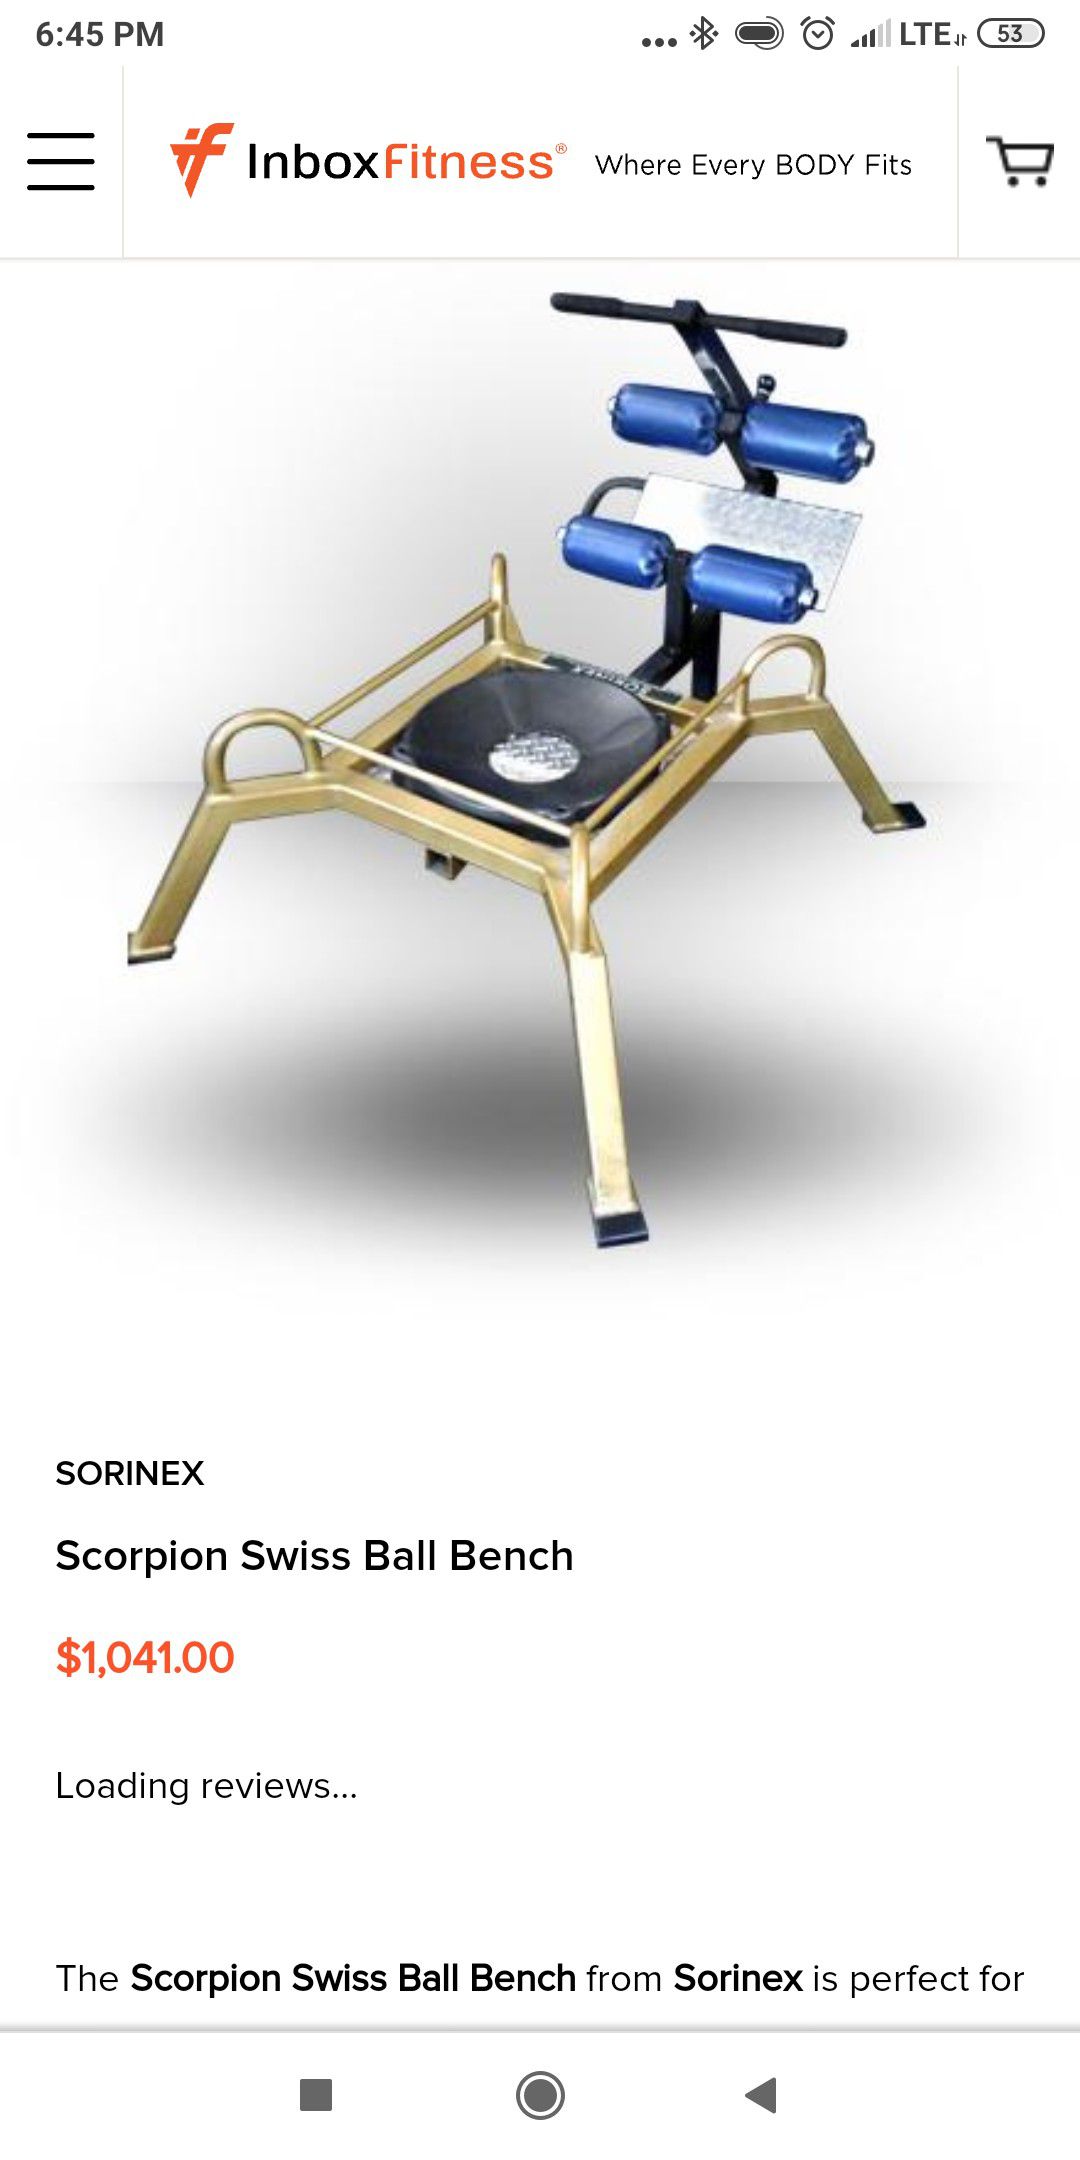 Sorinex bench very high-quality piece of equipment small compact multiple uses